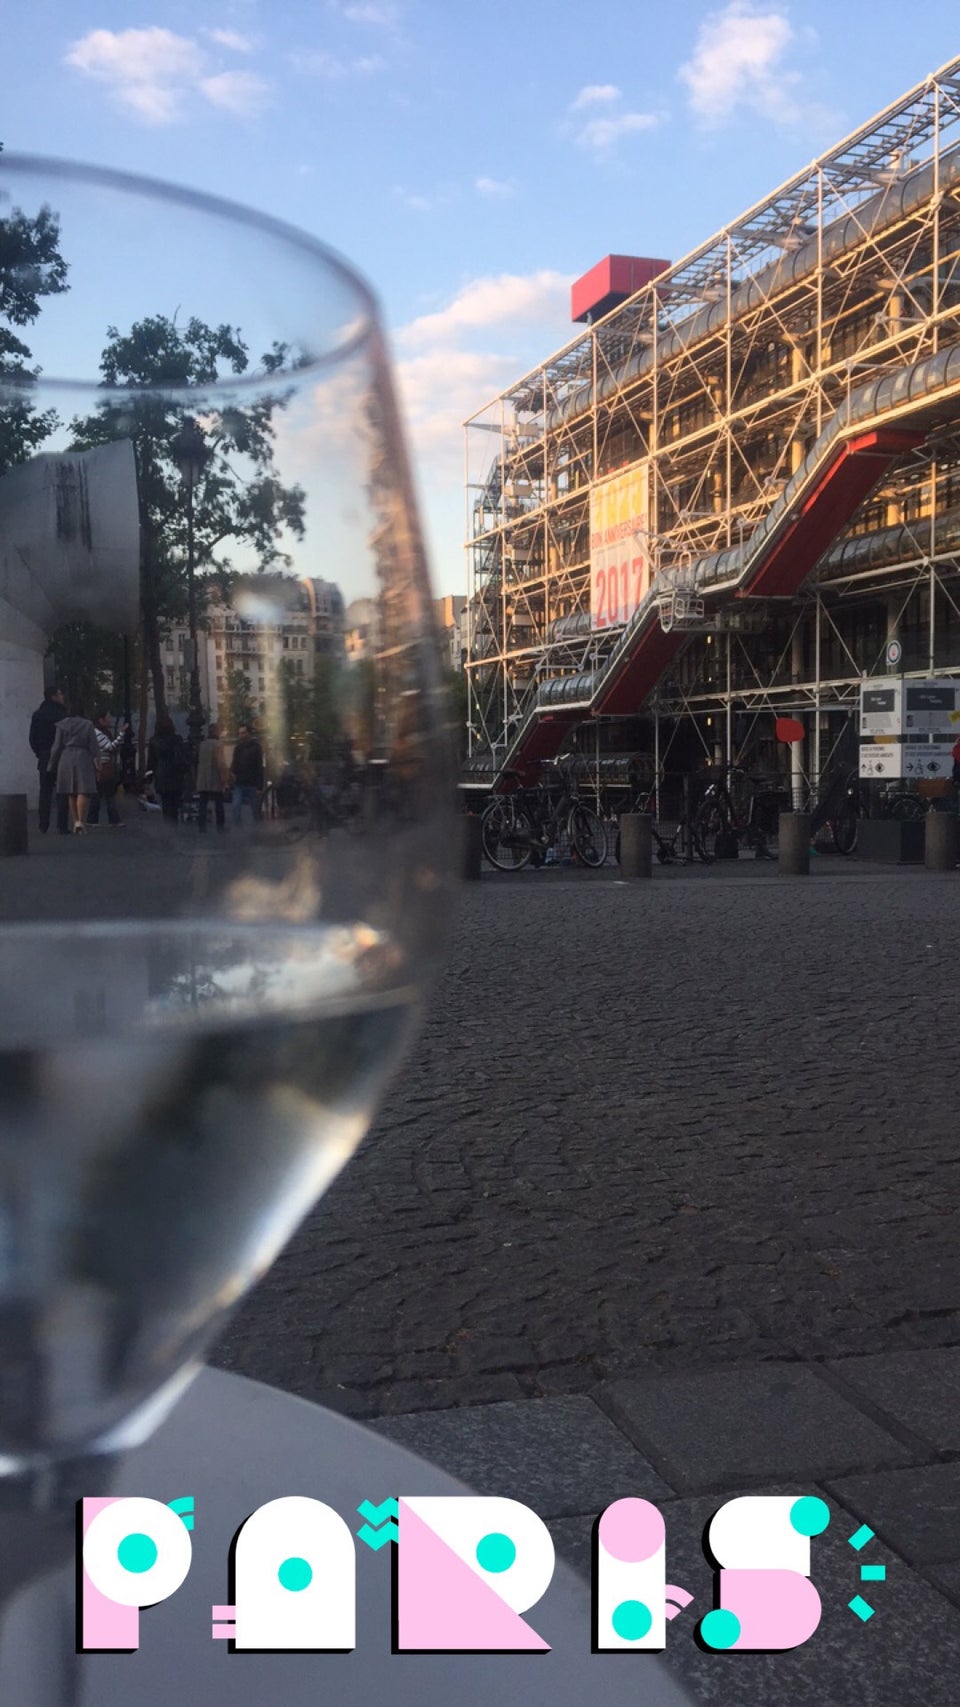 Photo of Cafe Beaubourg